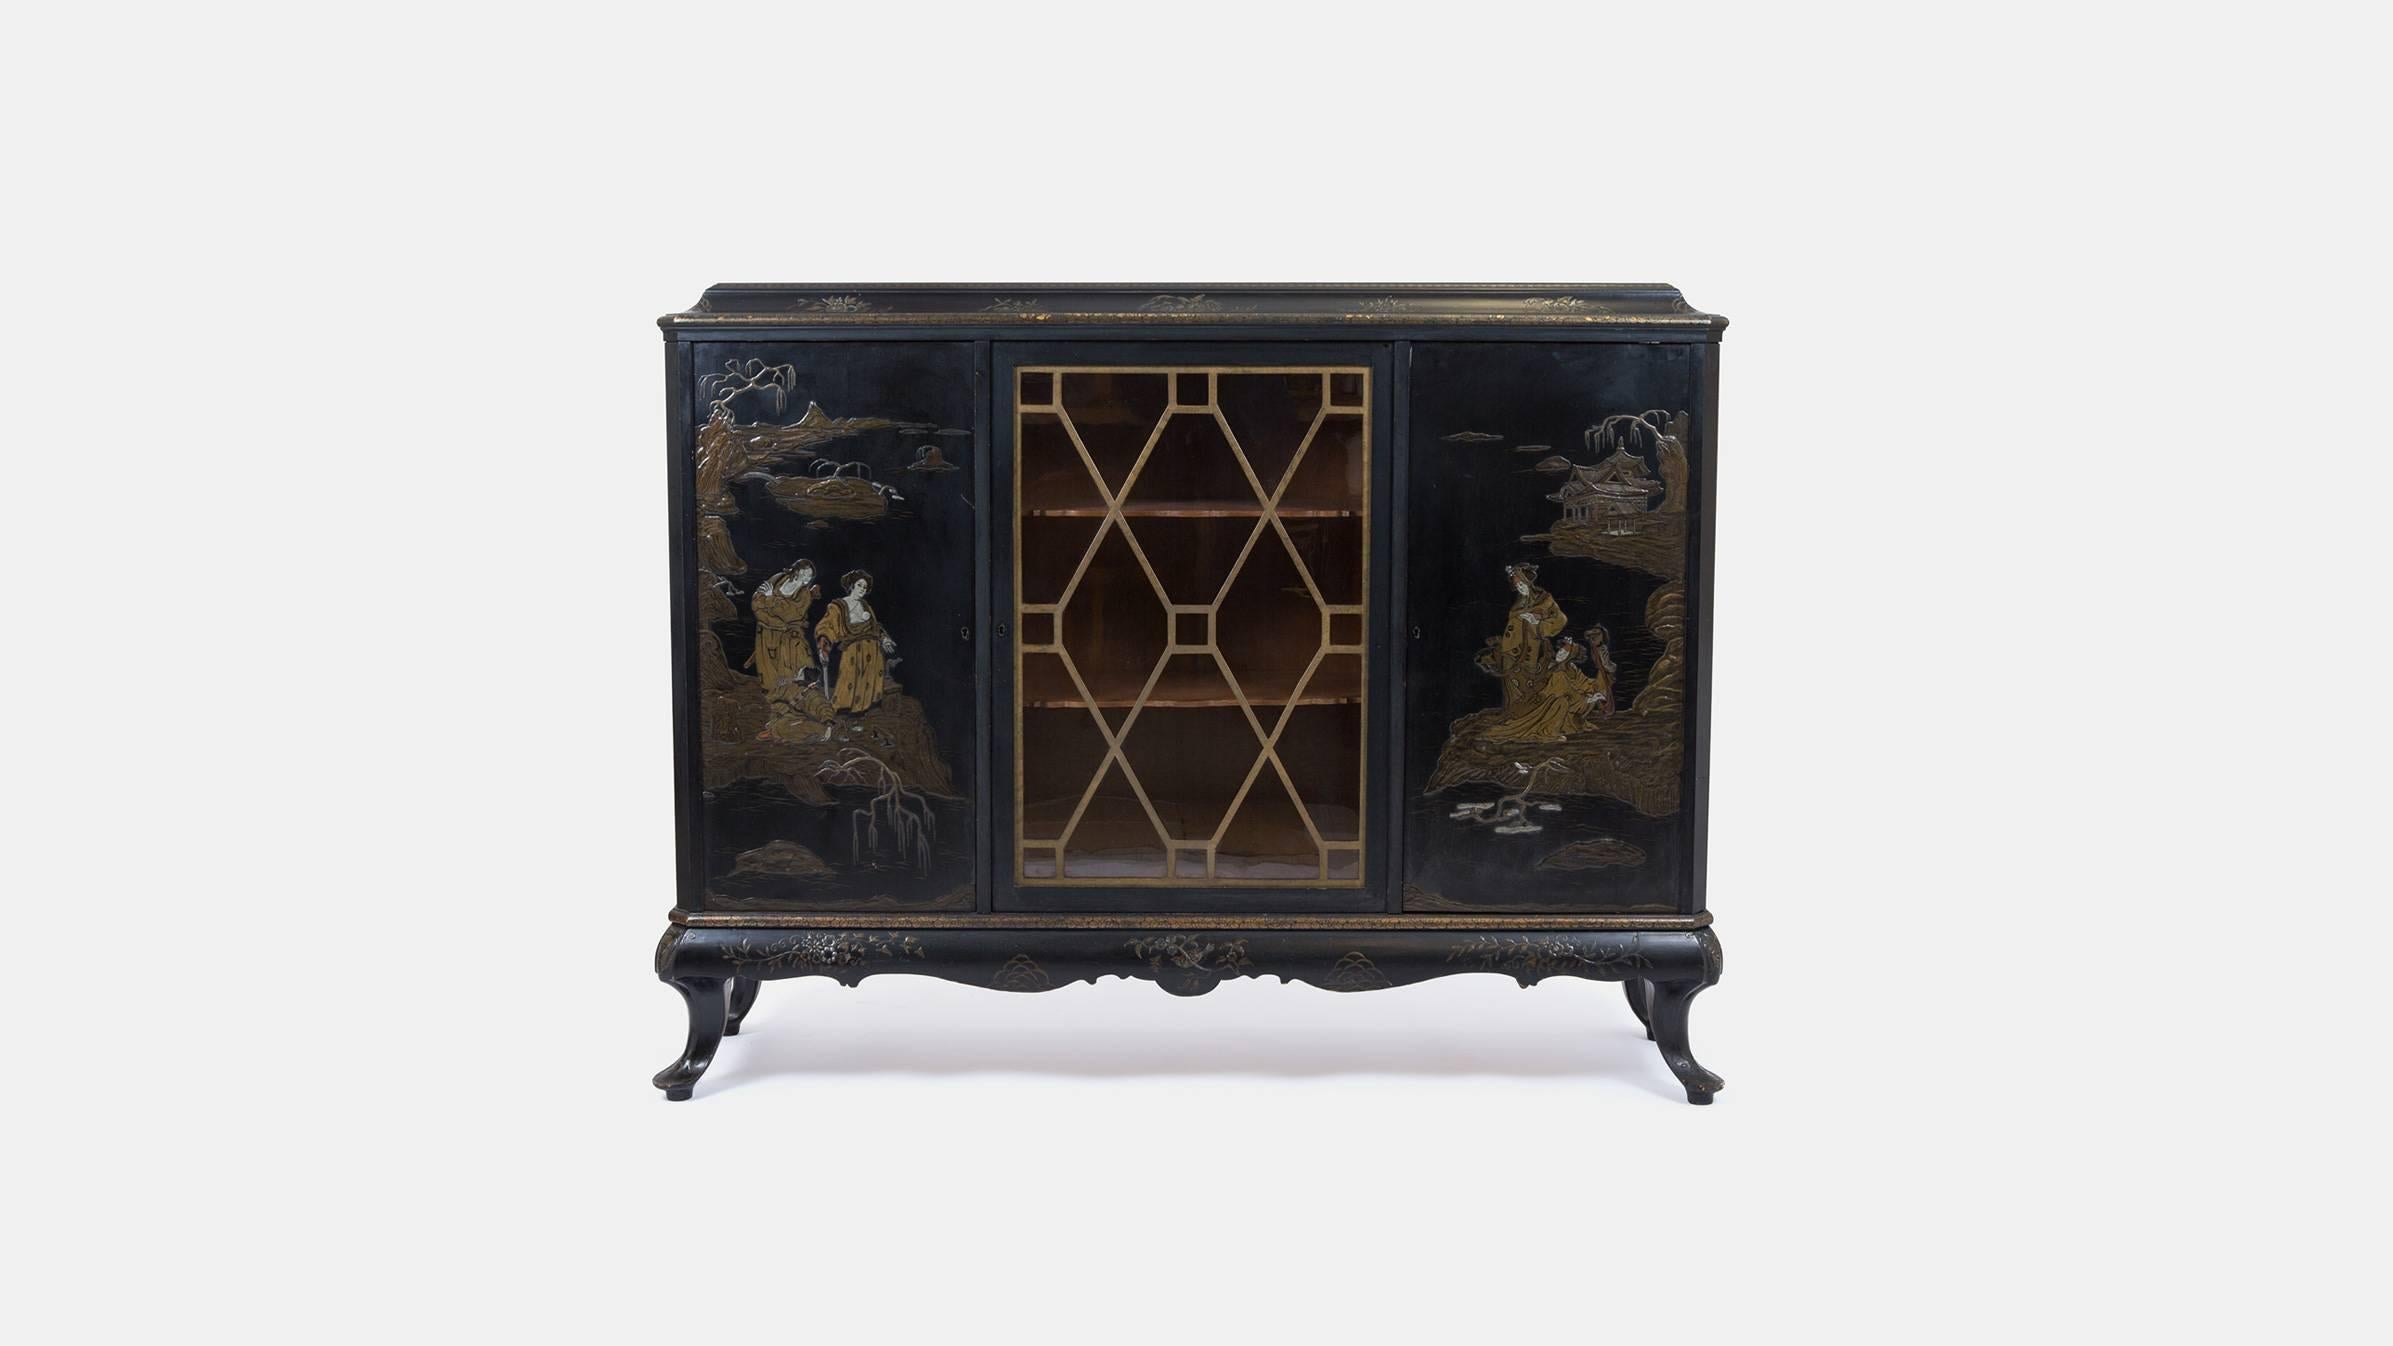 A stunning early 20th century French ebonized and chinoiserie lacquer side cabinet by Maison Jansen. The substantial cabinet has three cupboards, each with three shelves. Stamped Jansen (top right door, see image).

The Paris based design firm was